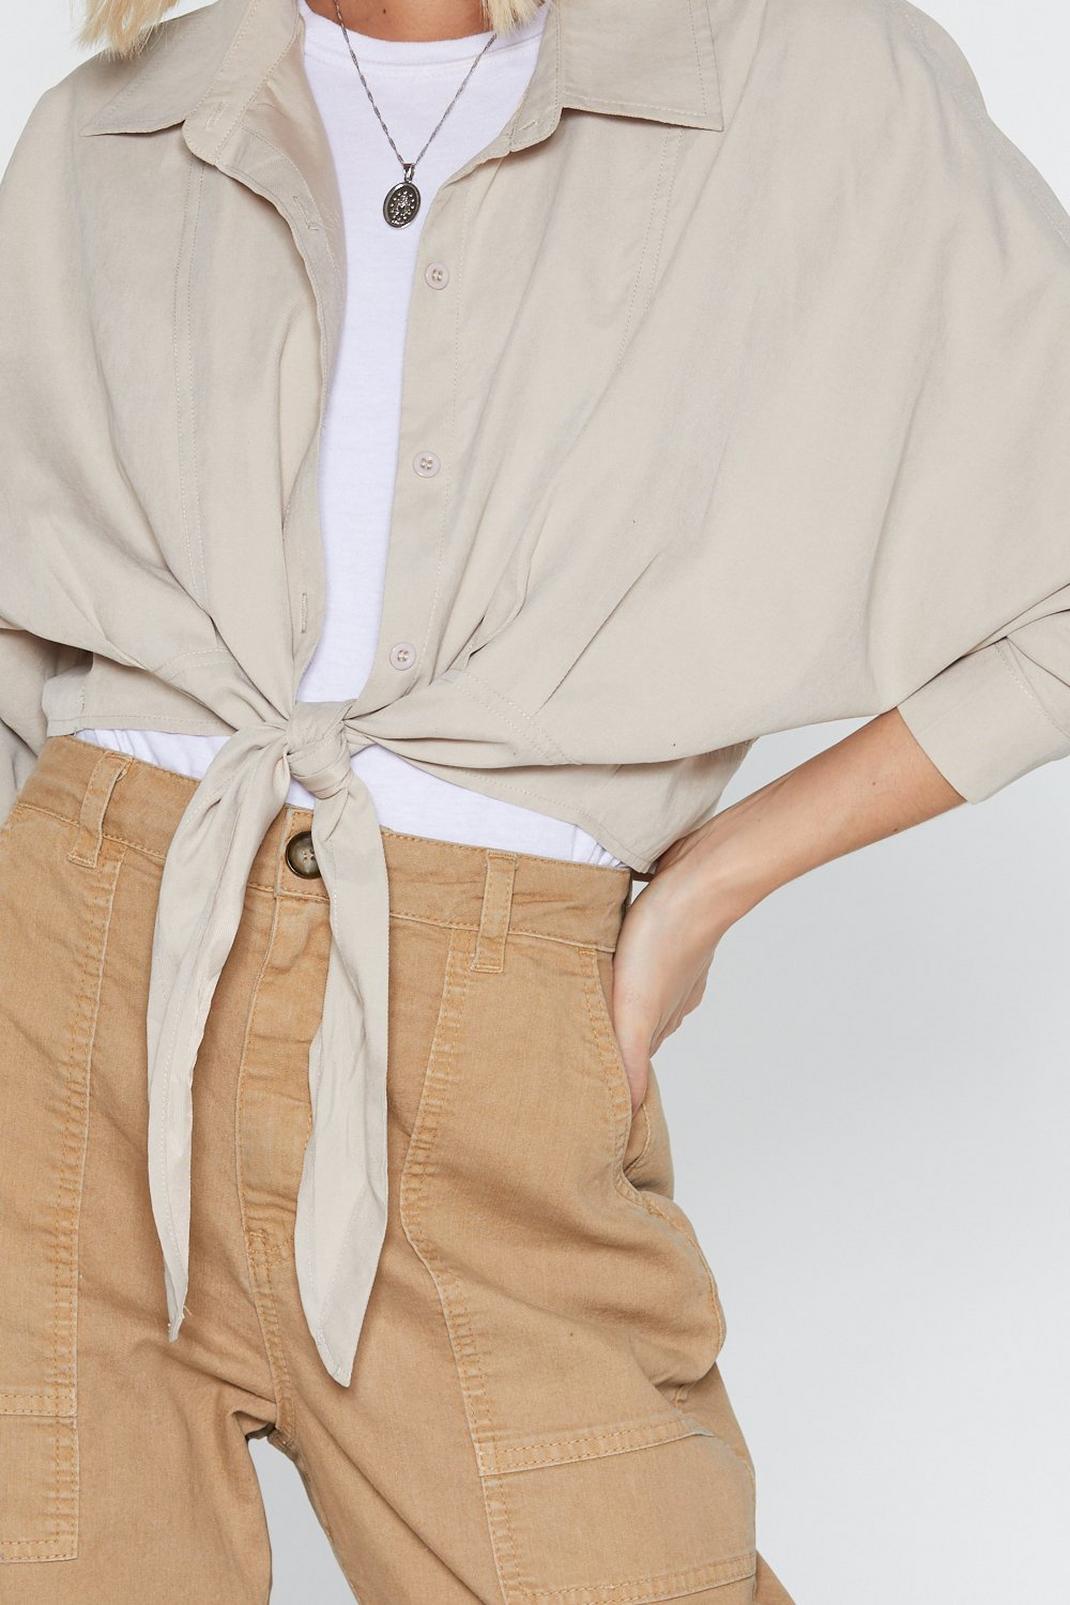 Tie the Knot Cropped Shirt | Nasty Gal